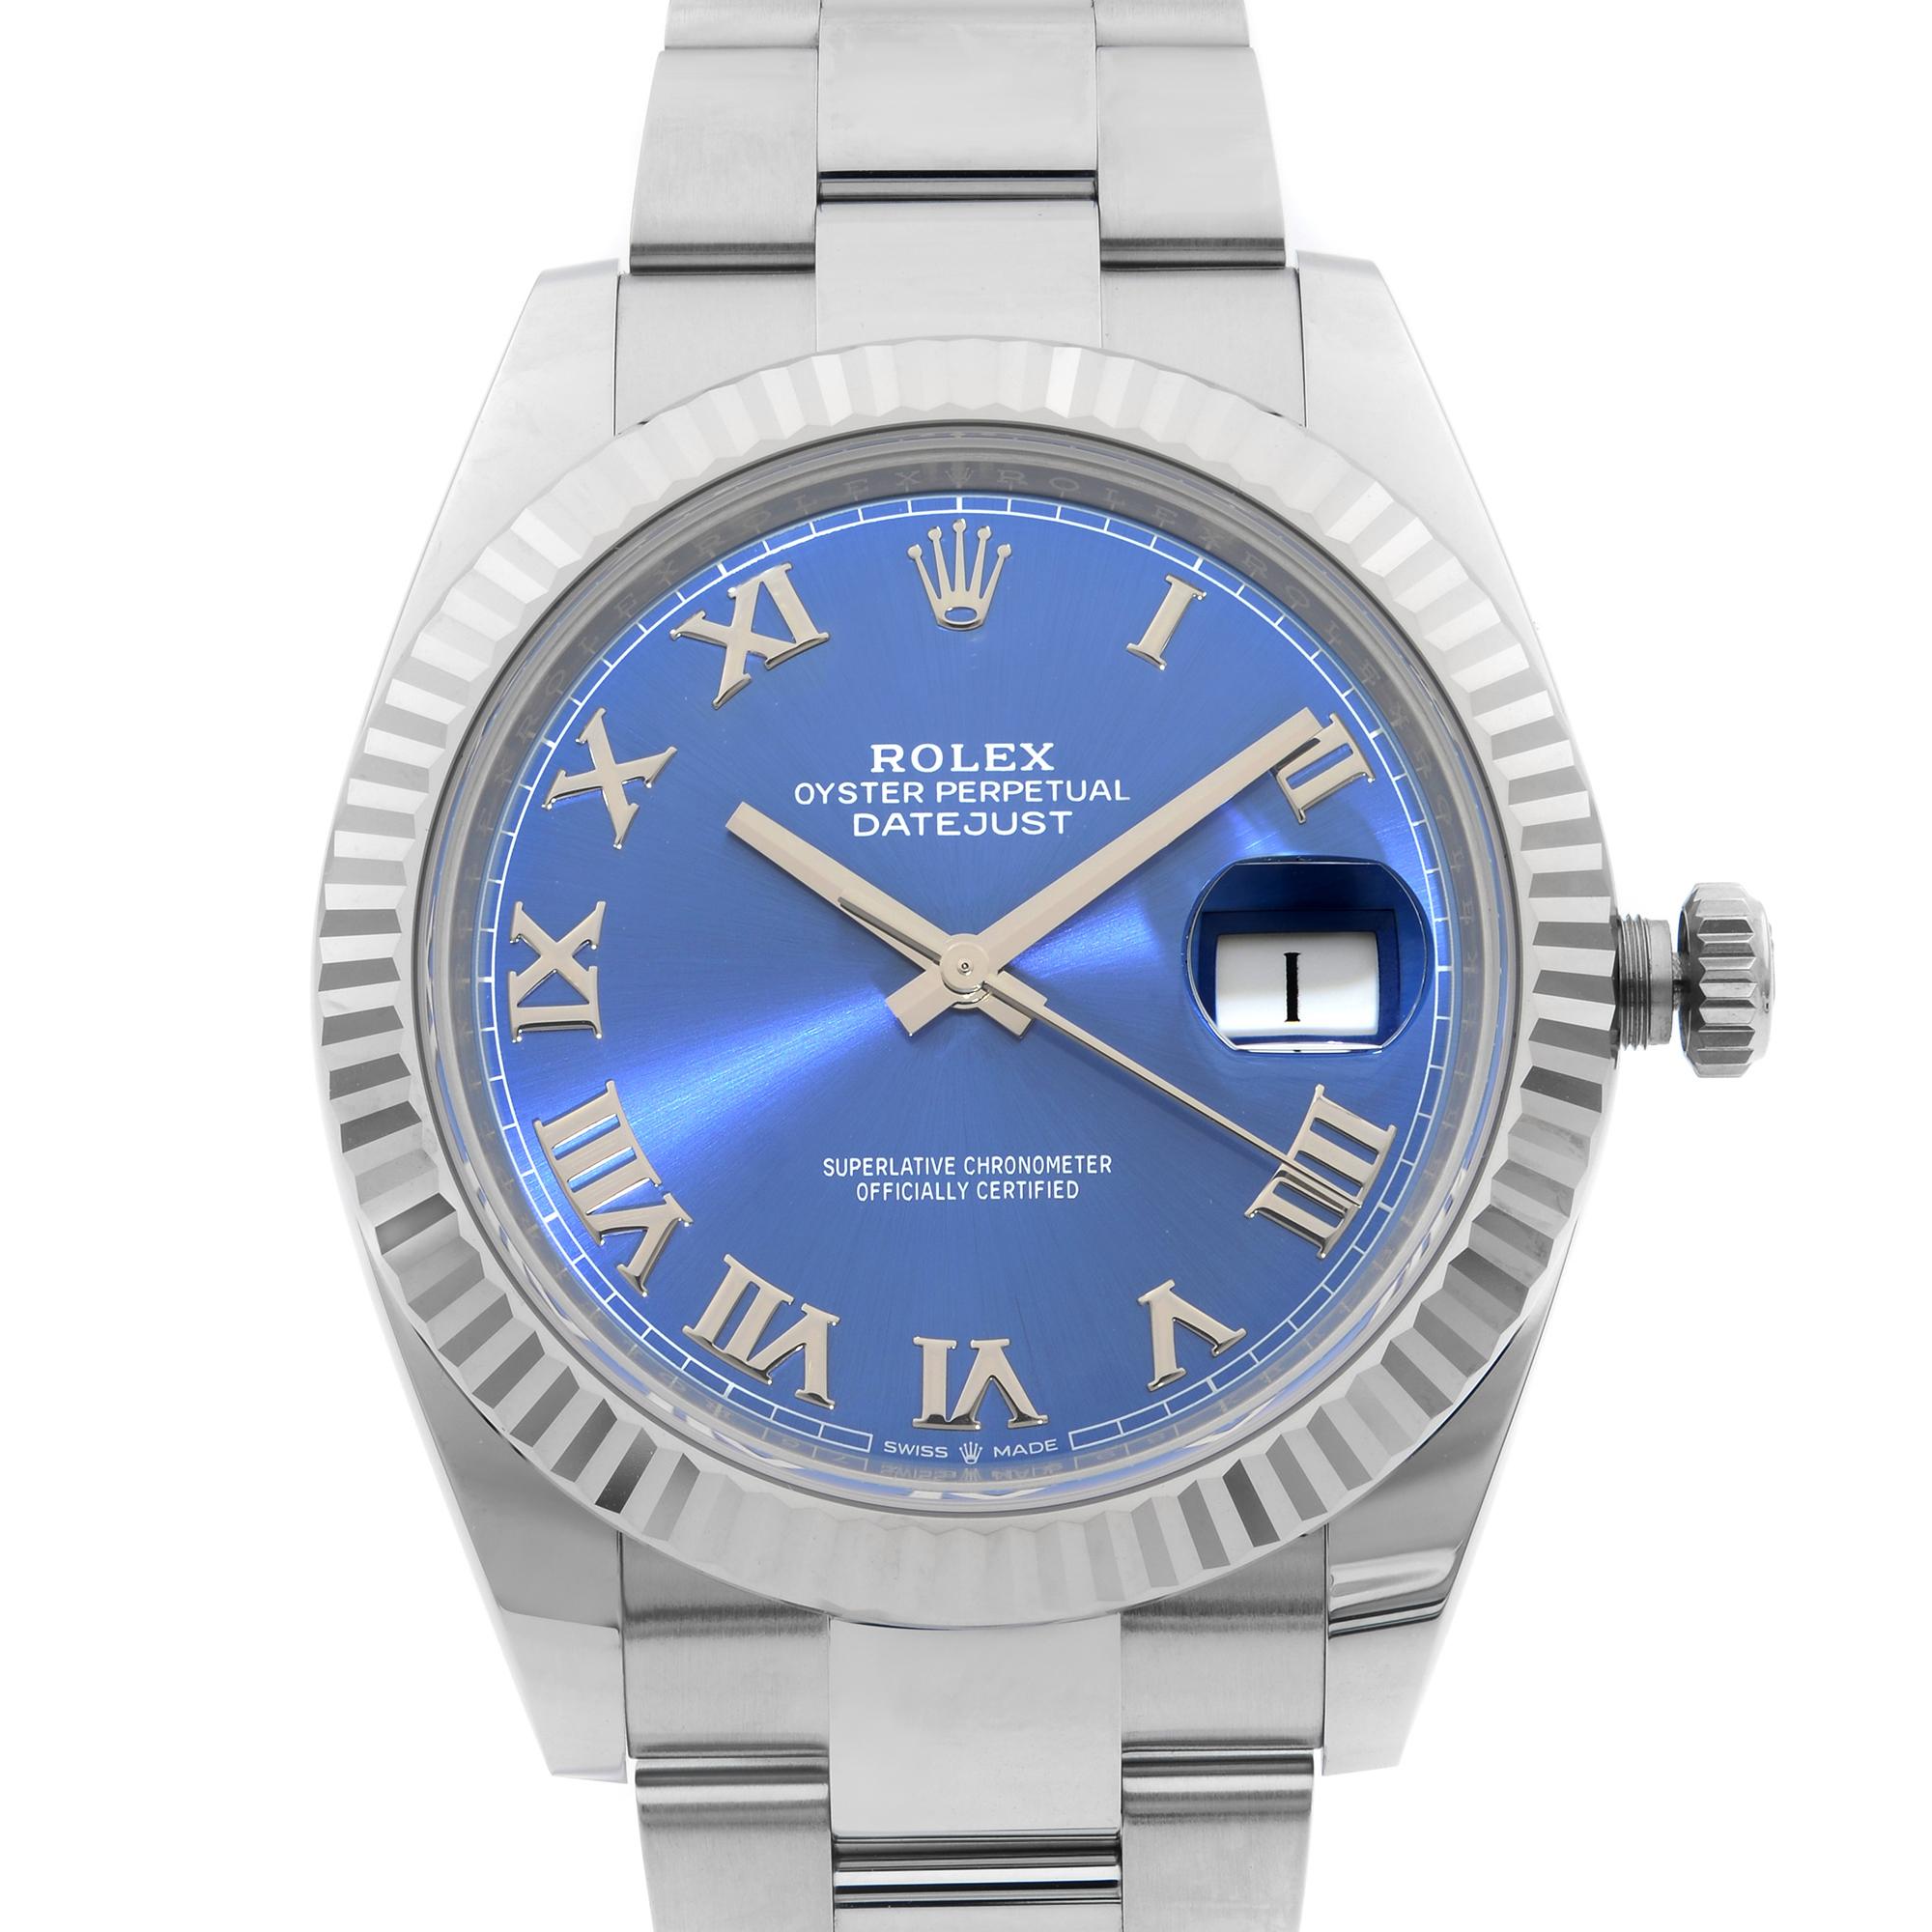 2019 card. Pre-owned  model Rolex Datejust 41 126334 is a beautiful men's timepiece that is powered by a mechanical (automatic) movement that is cased in a stainless steel case. It has a round shape face, date indicator dial, and has hand roman